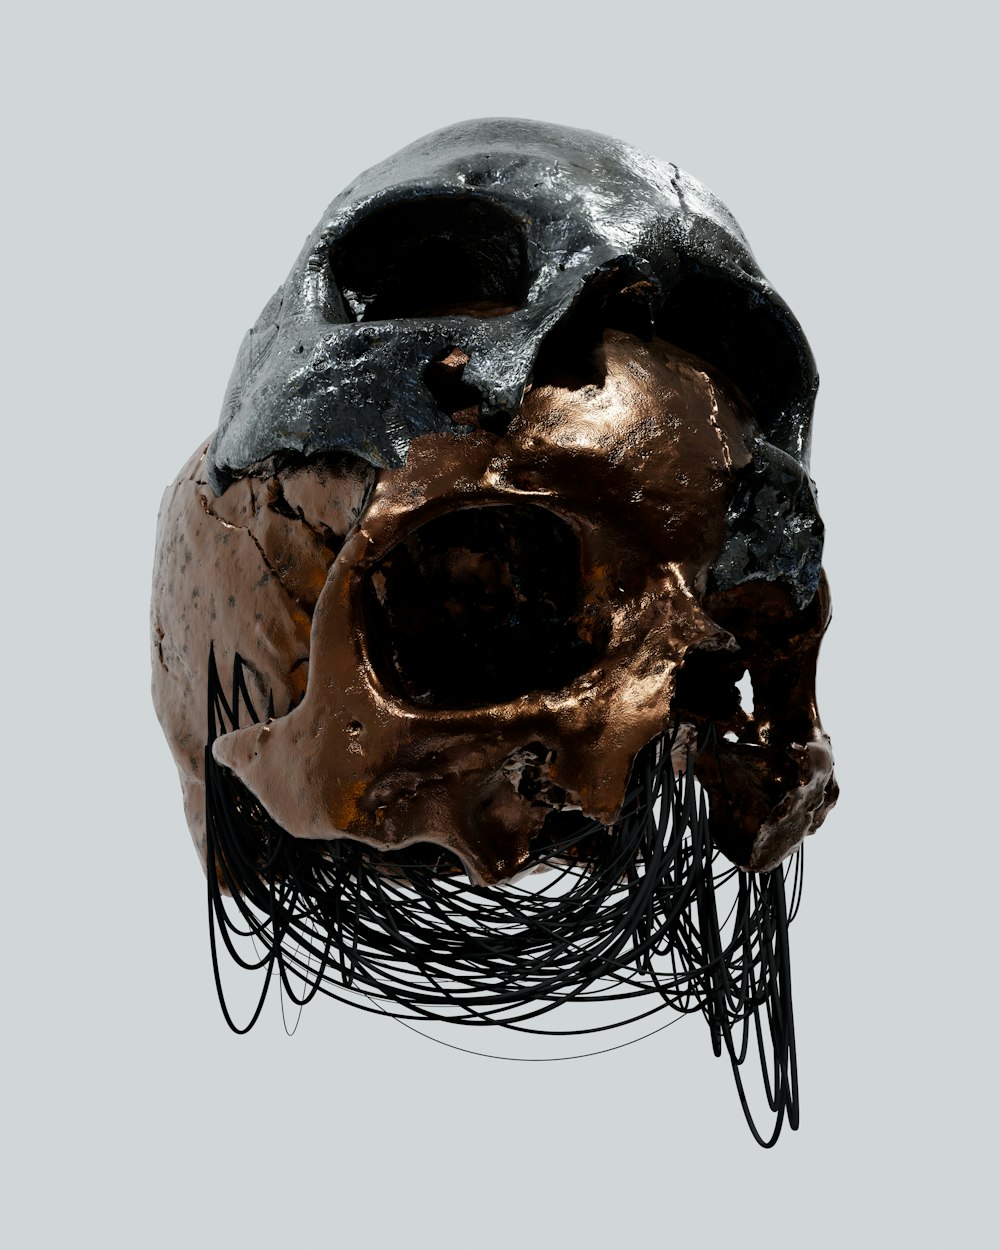 a metal sculpture of a human skull with hair on it's head